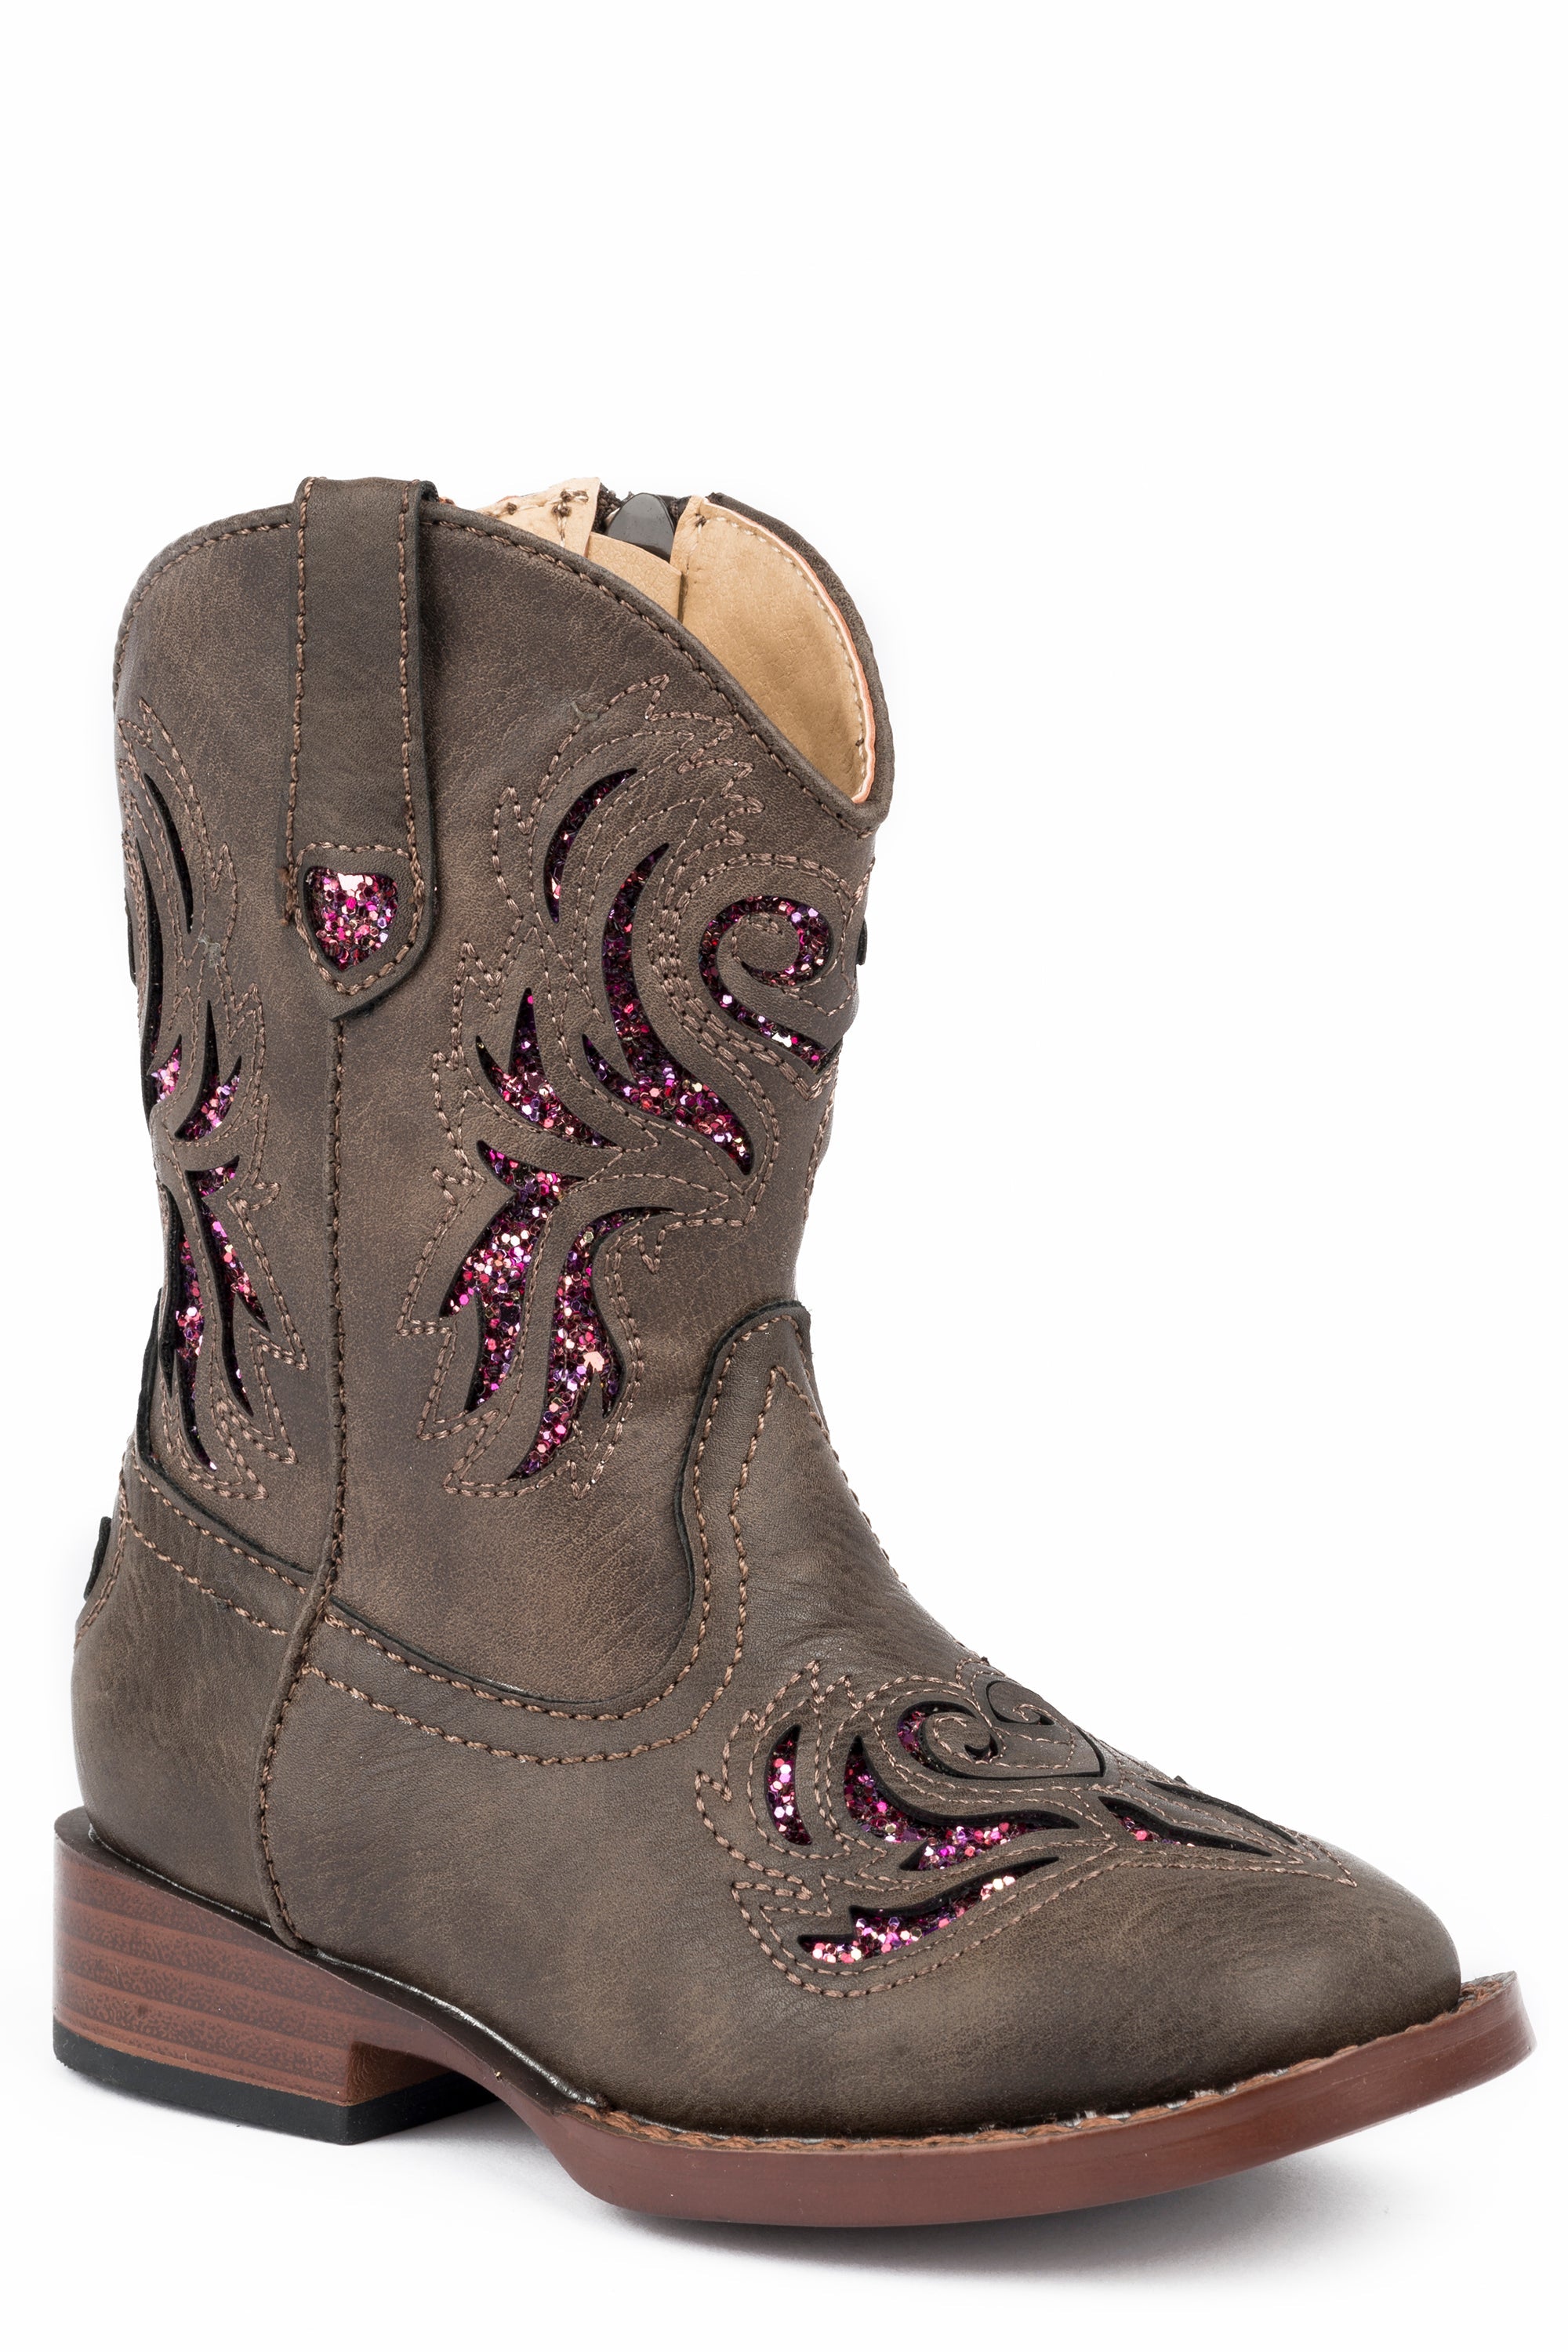 Roper Girls Toddler Brown With Pink Glitter Cutouts